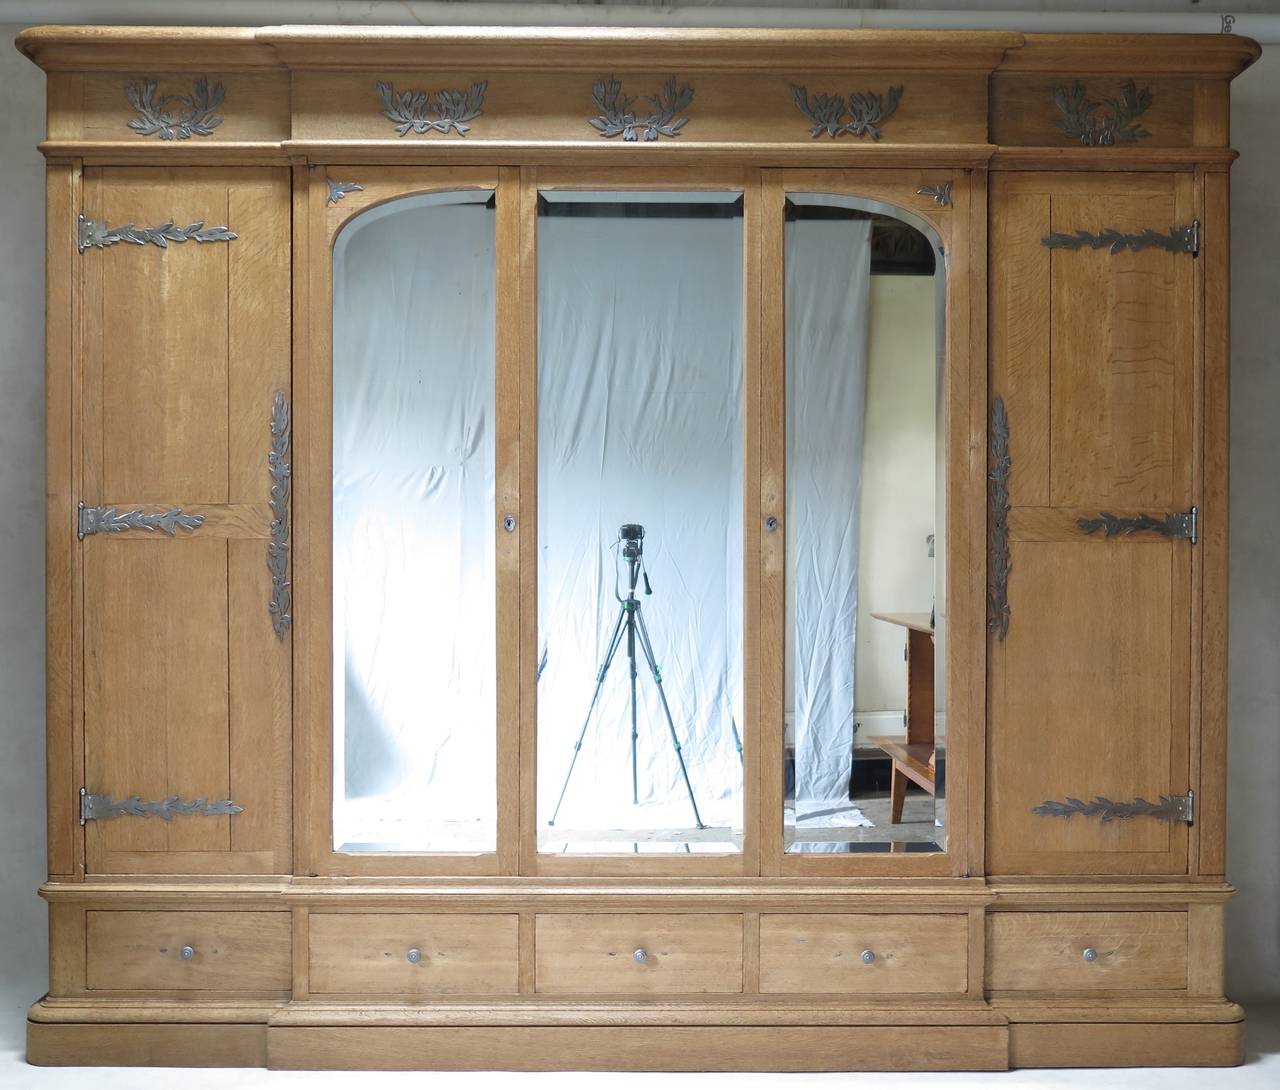 Impressive breakfront armoire in solid brushed oak, with four doors, and a central fixed door (see photo with doors open).
Unusual olive leaf motif hardware and appliquéd décor.
The three center doors are mirrored with original beveled